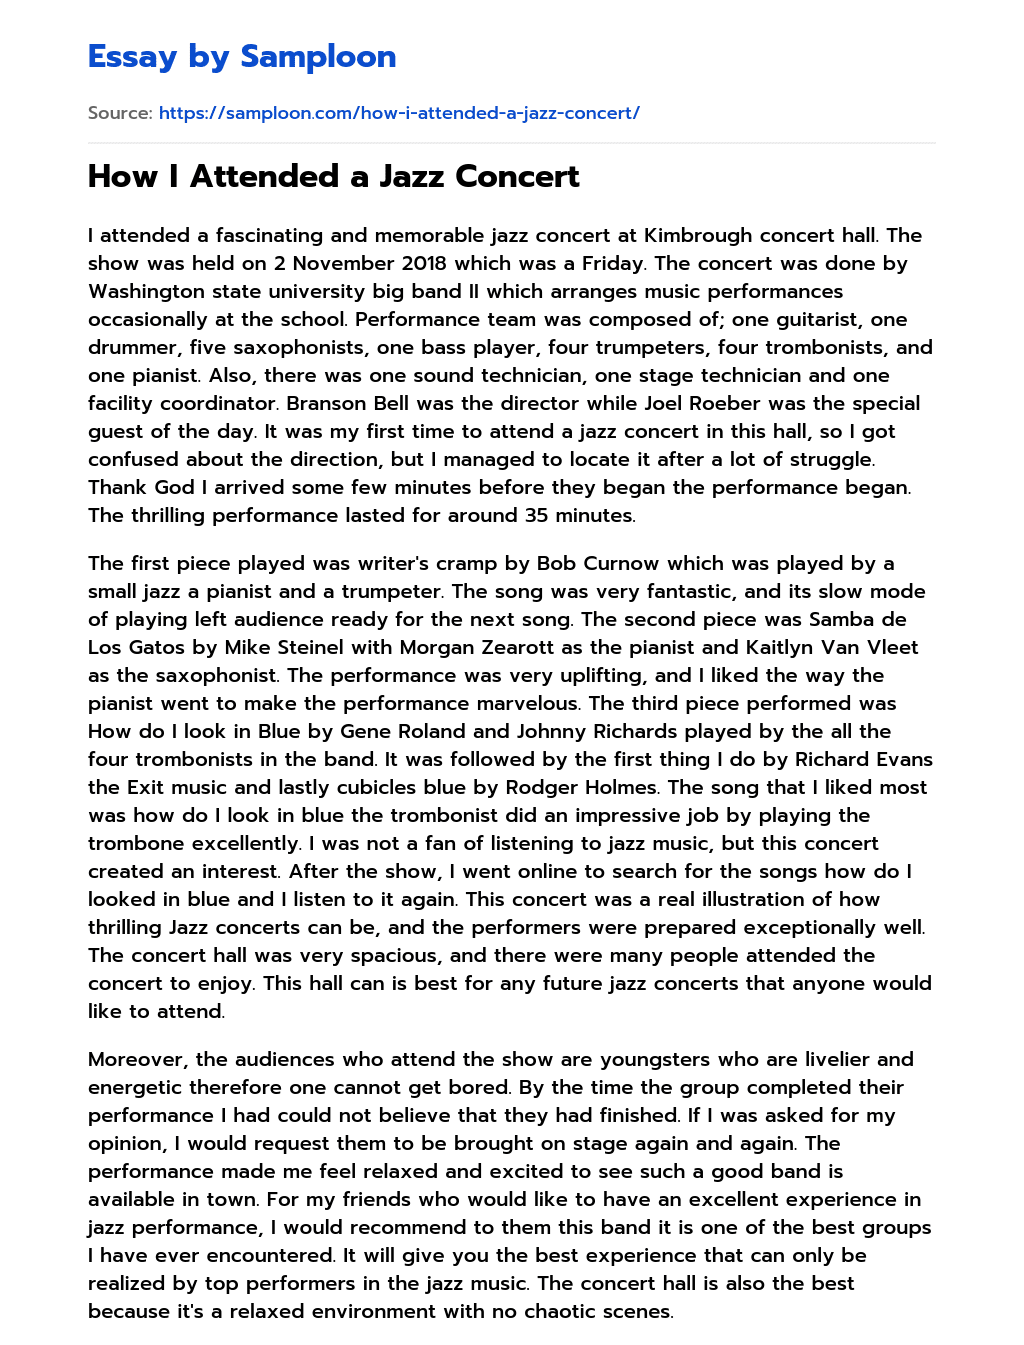 How I Attended a Jazz Concert essay